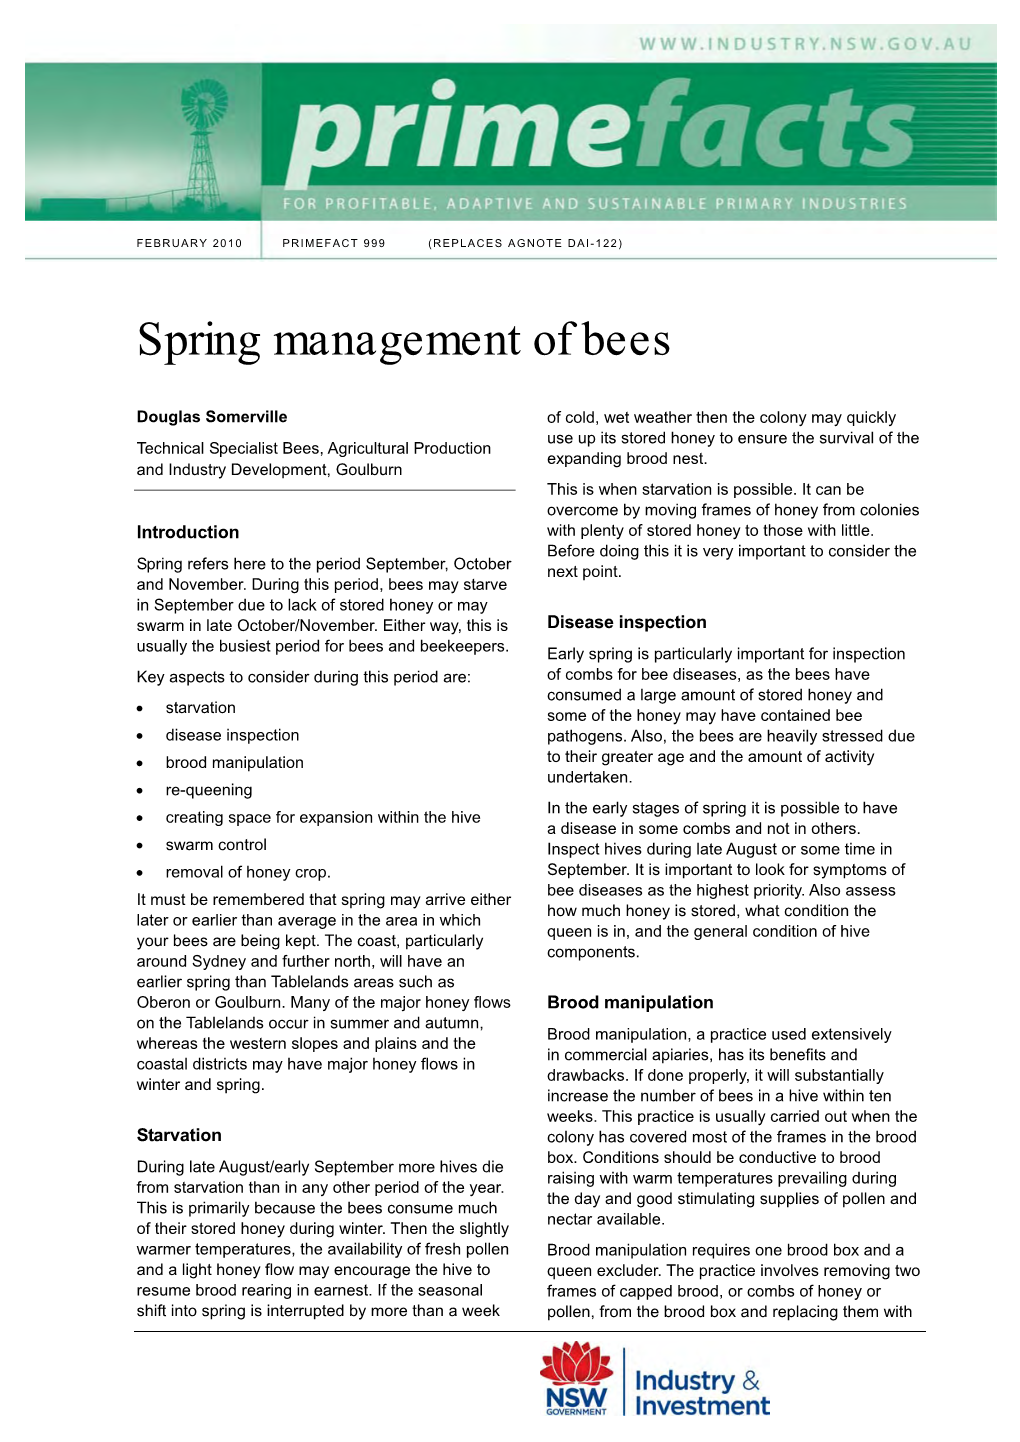 Spring Management of Bees